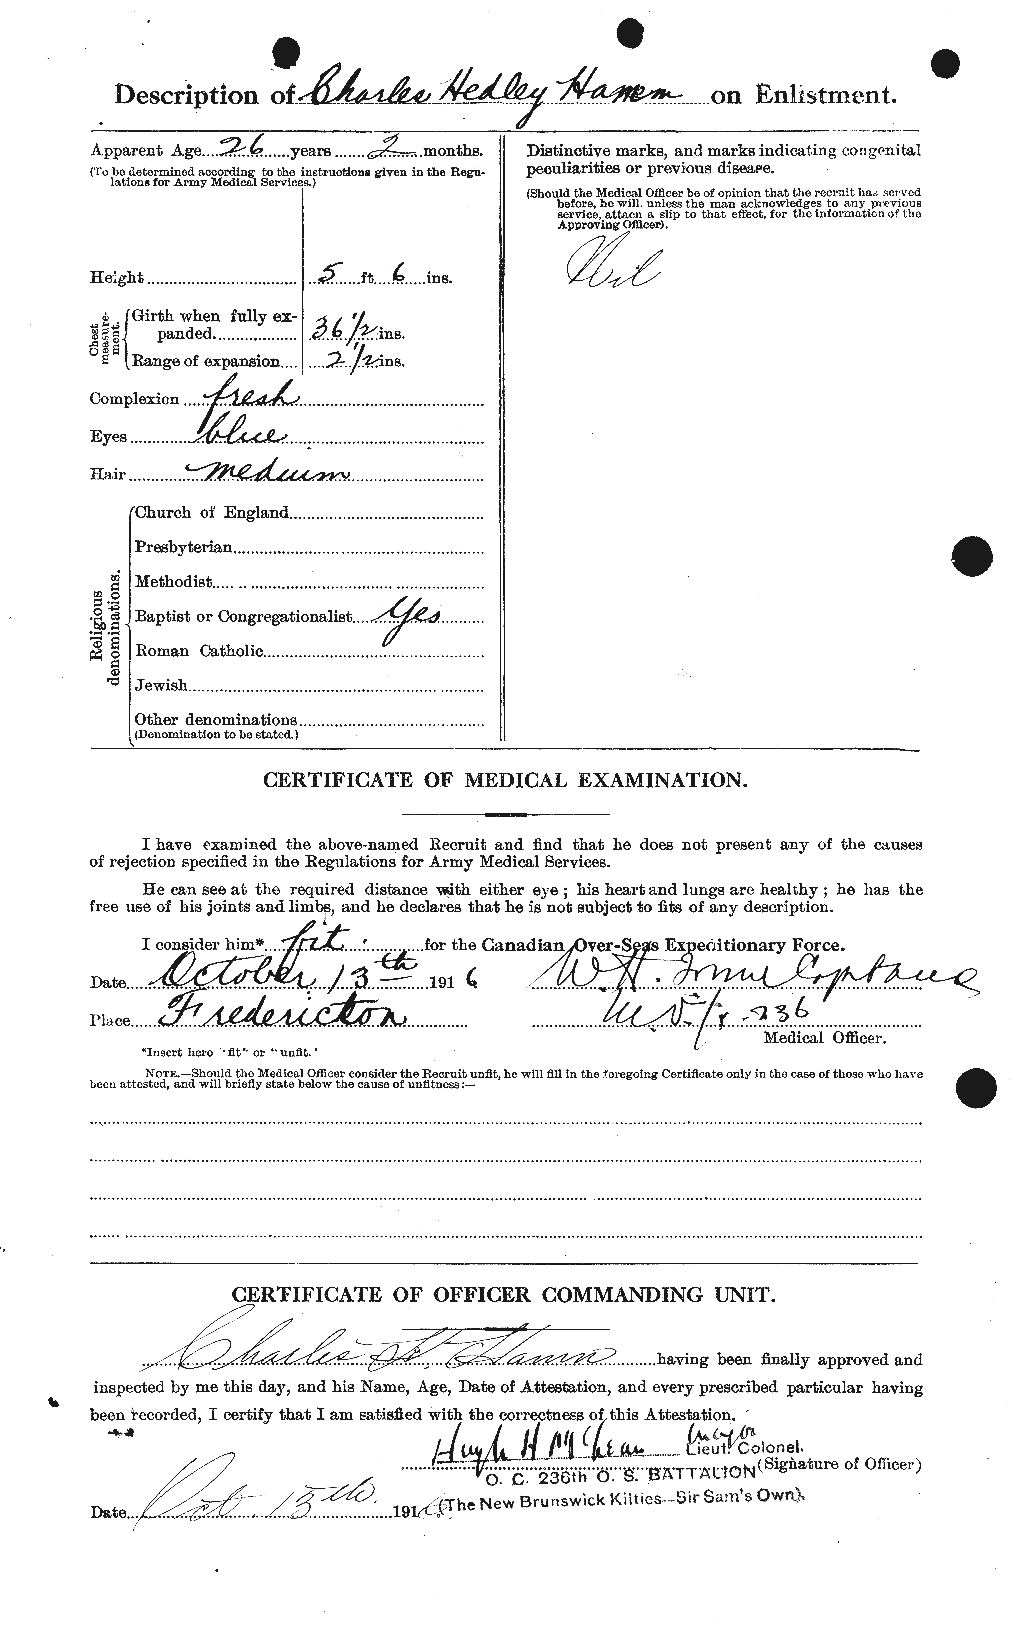 Personnel Records of the First World War - CEF 375010b